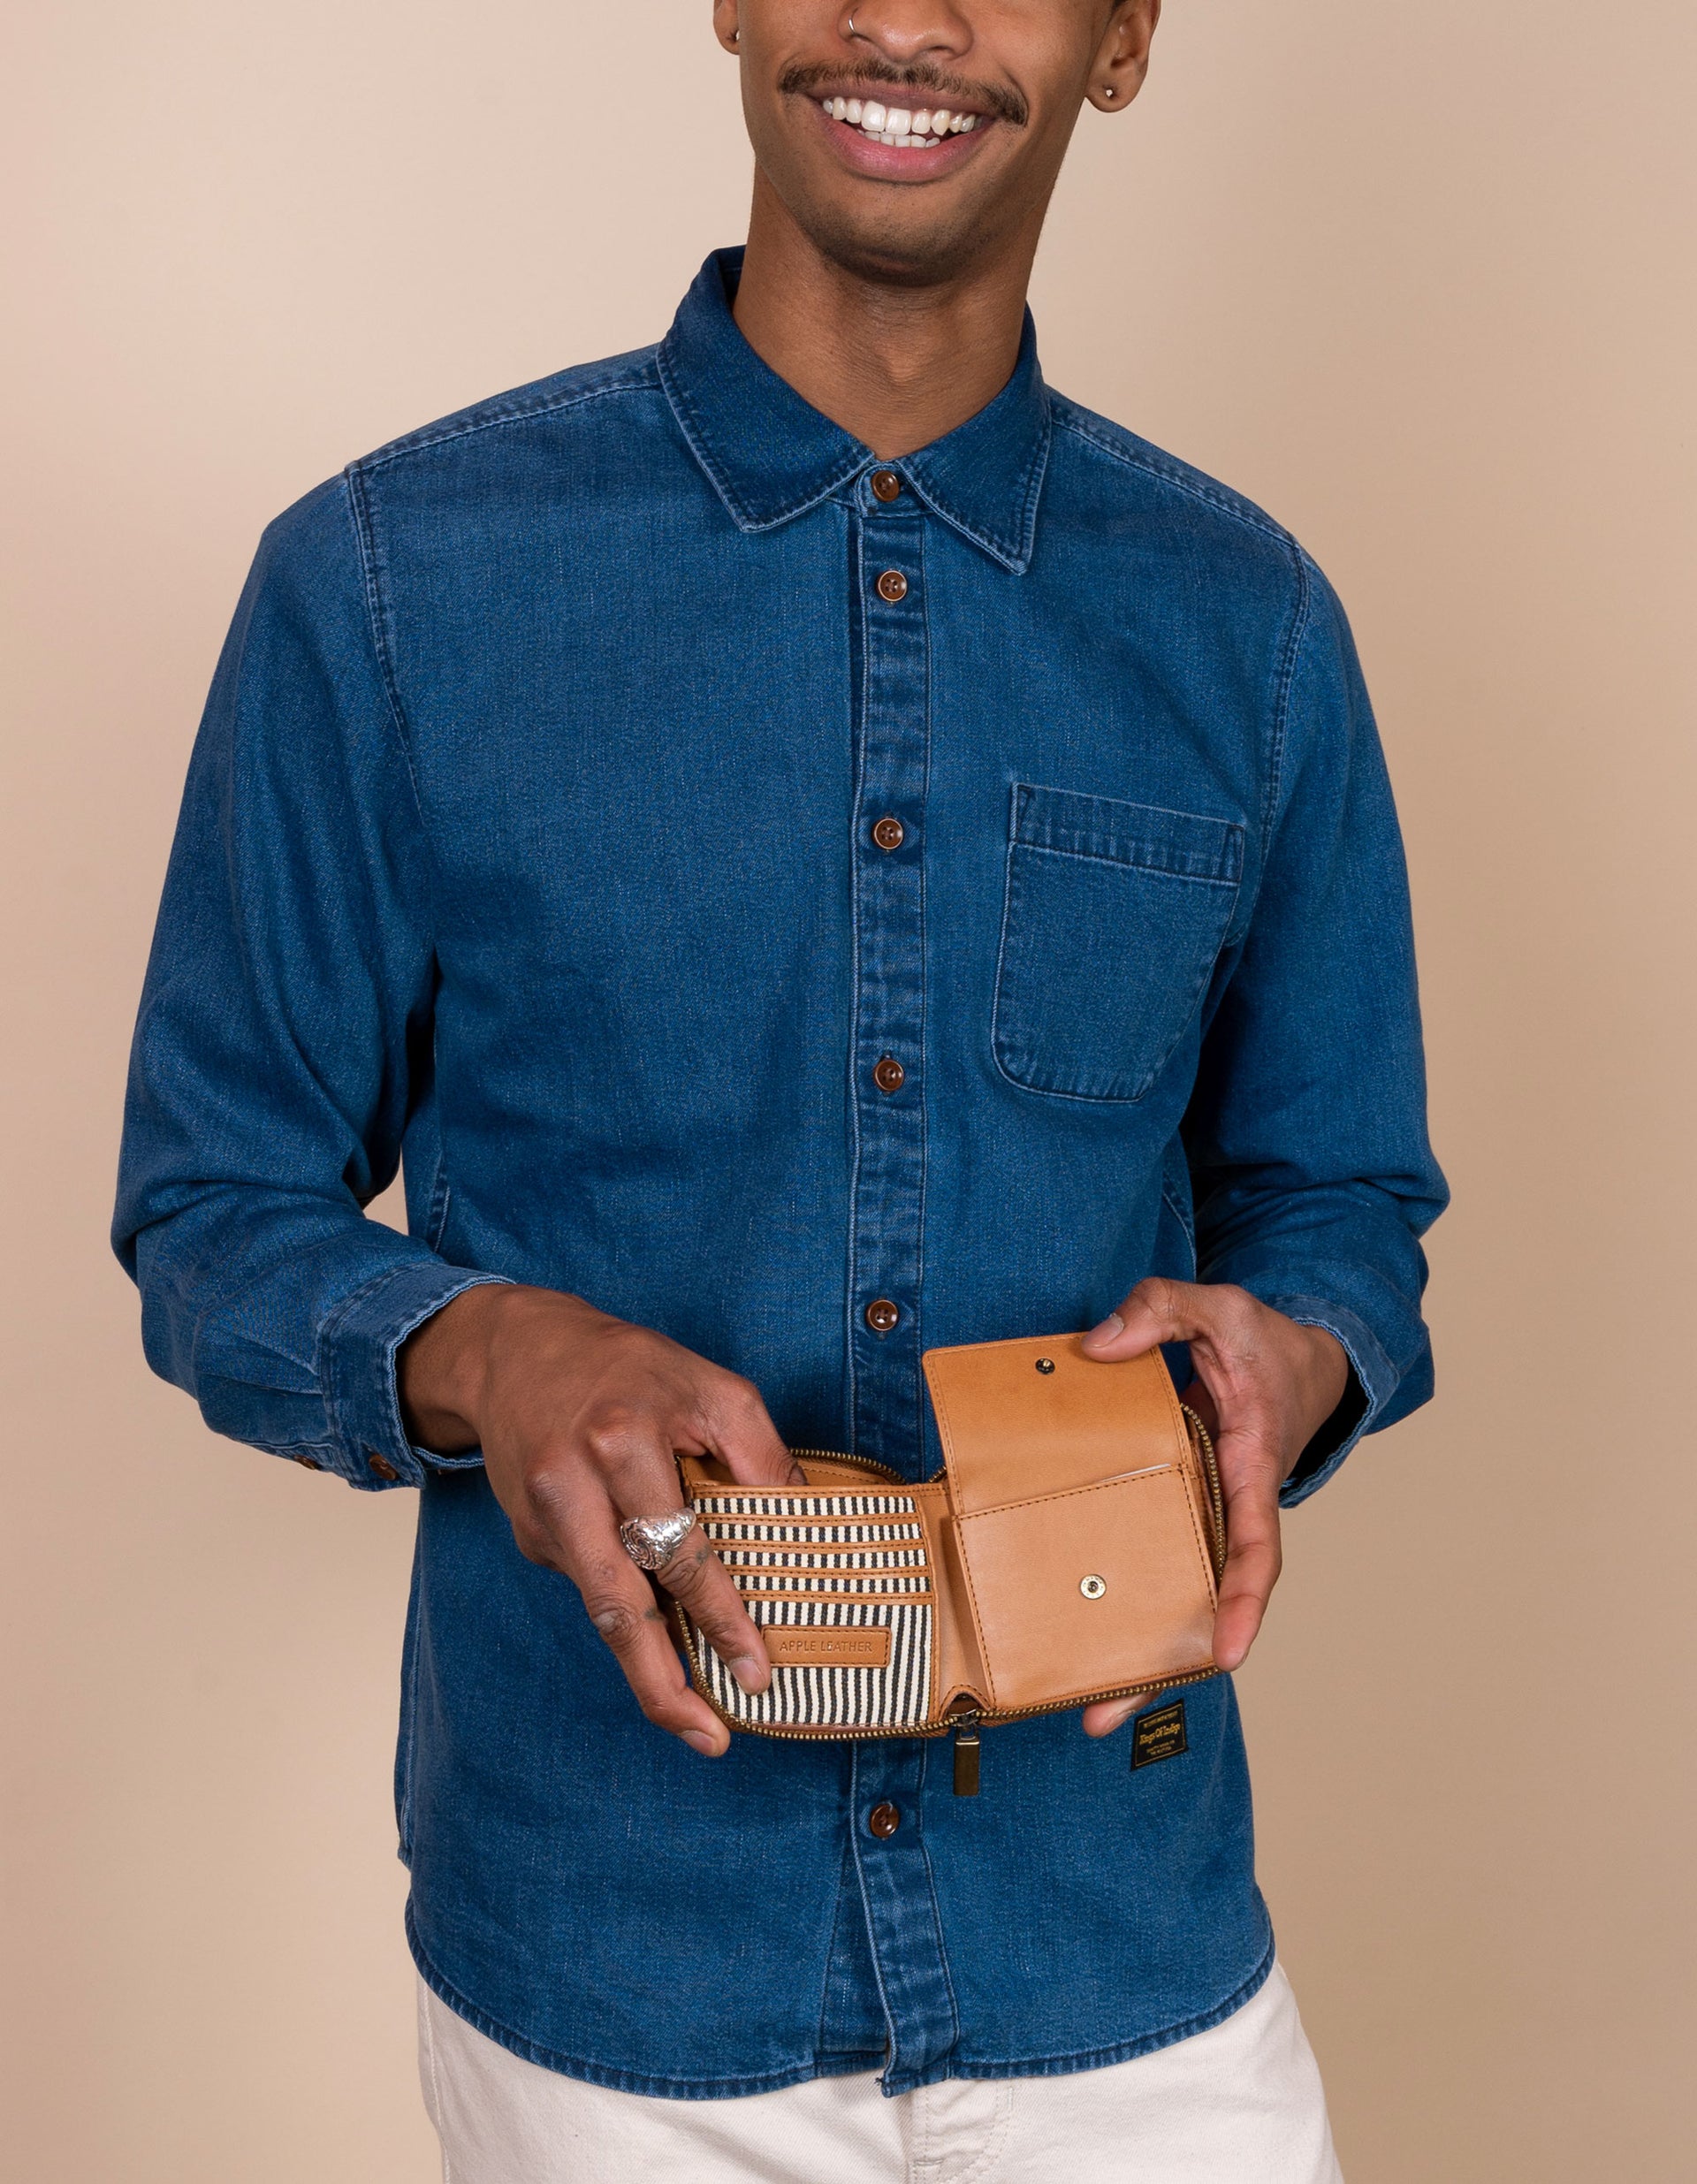 Sonny square apple leather wallet. Male model product image. Inside view.